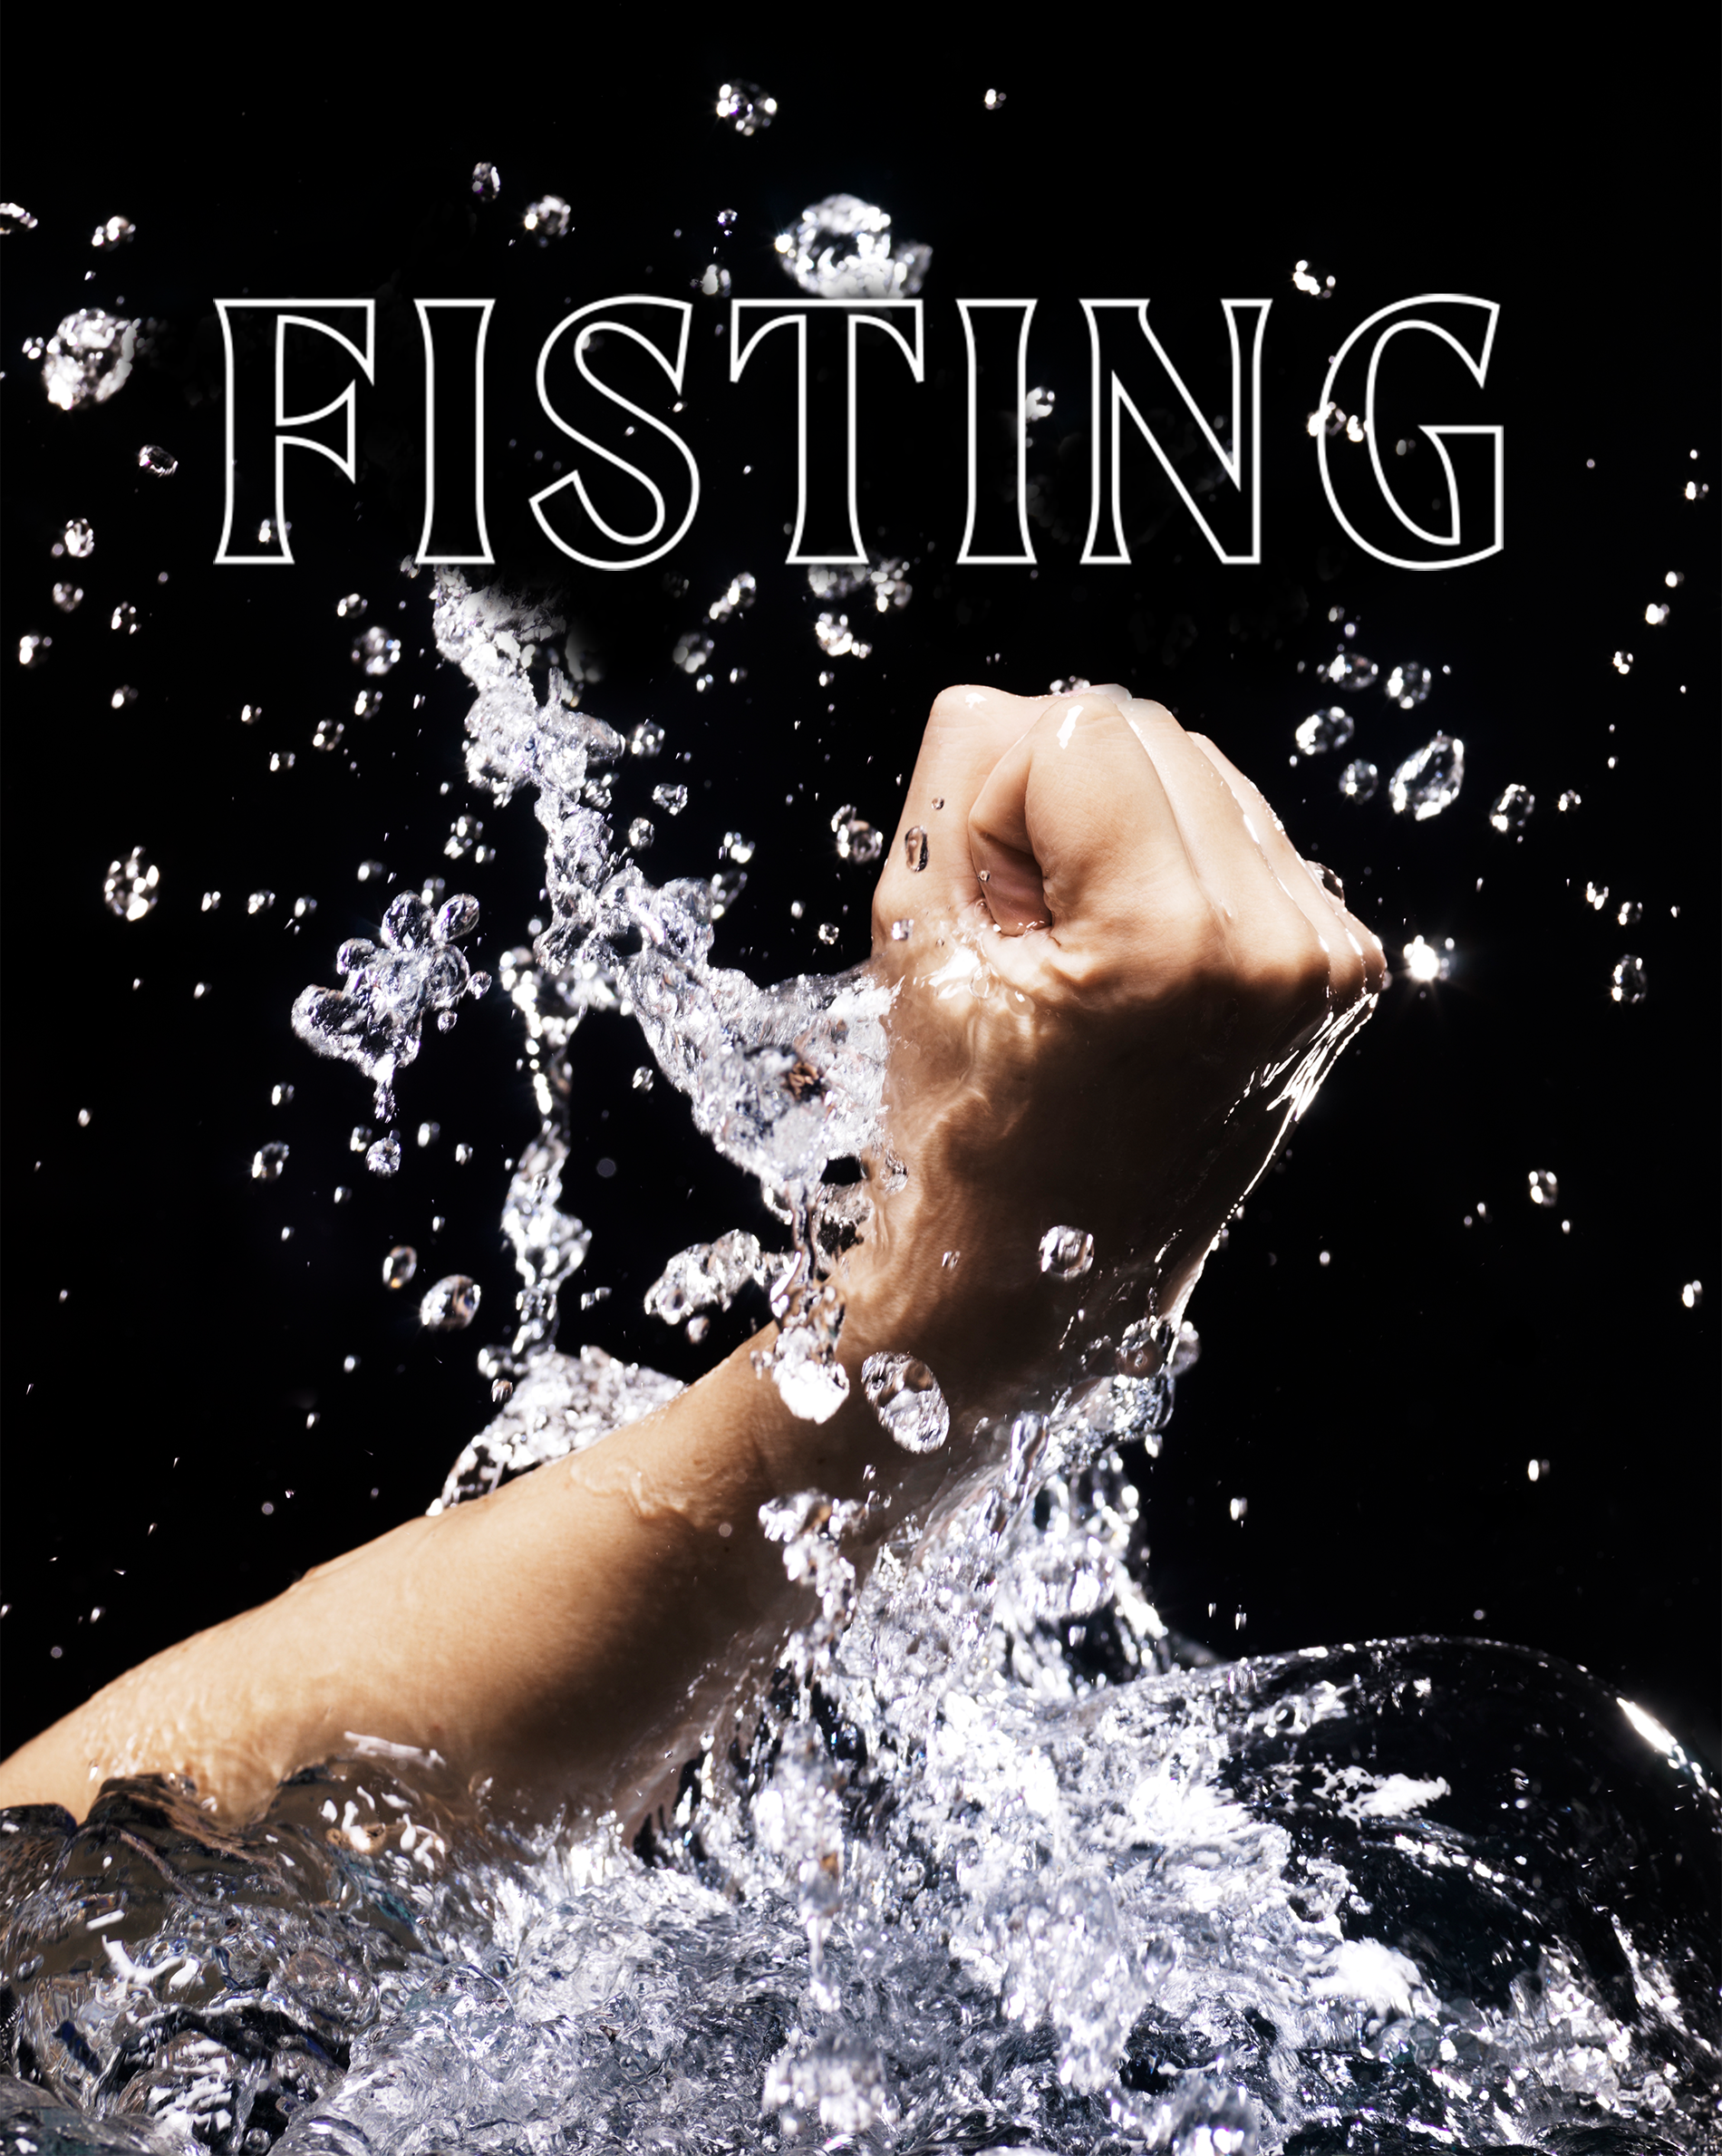 Fisting Sex Bleeding - 24 Fisting Tips for Beginners - How Do You Fist A Woman?